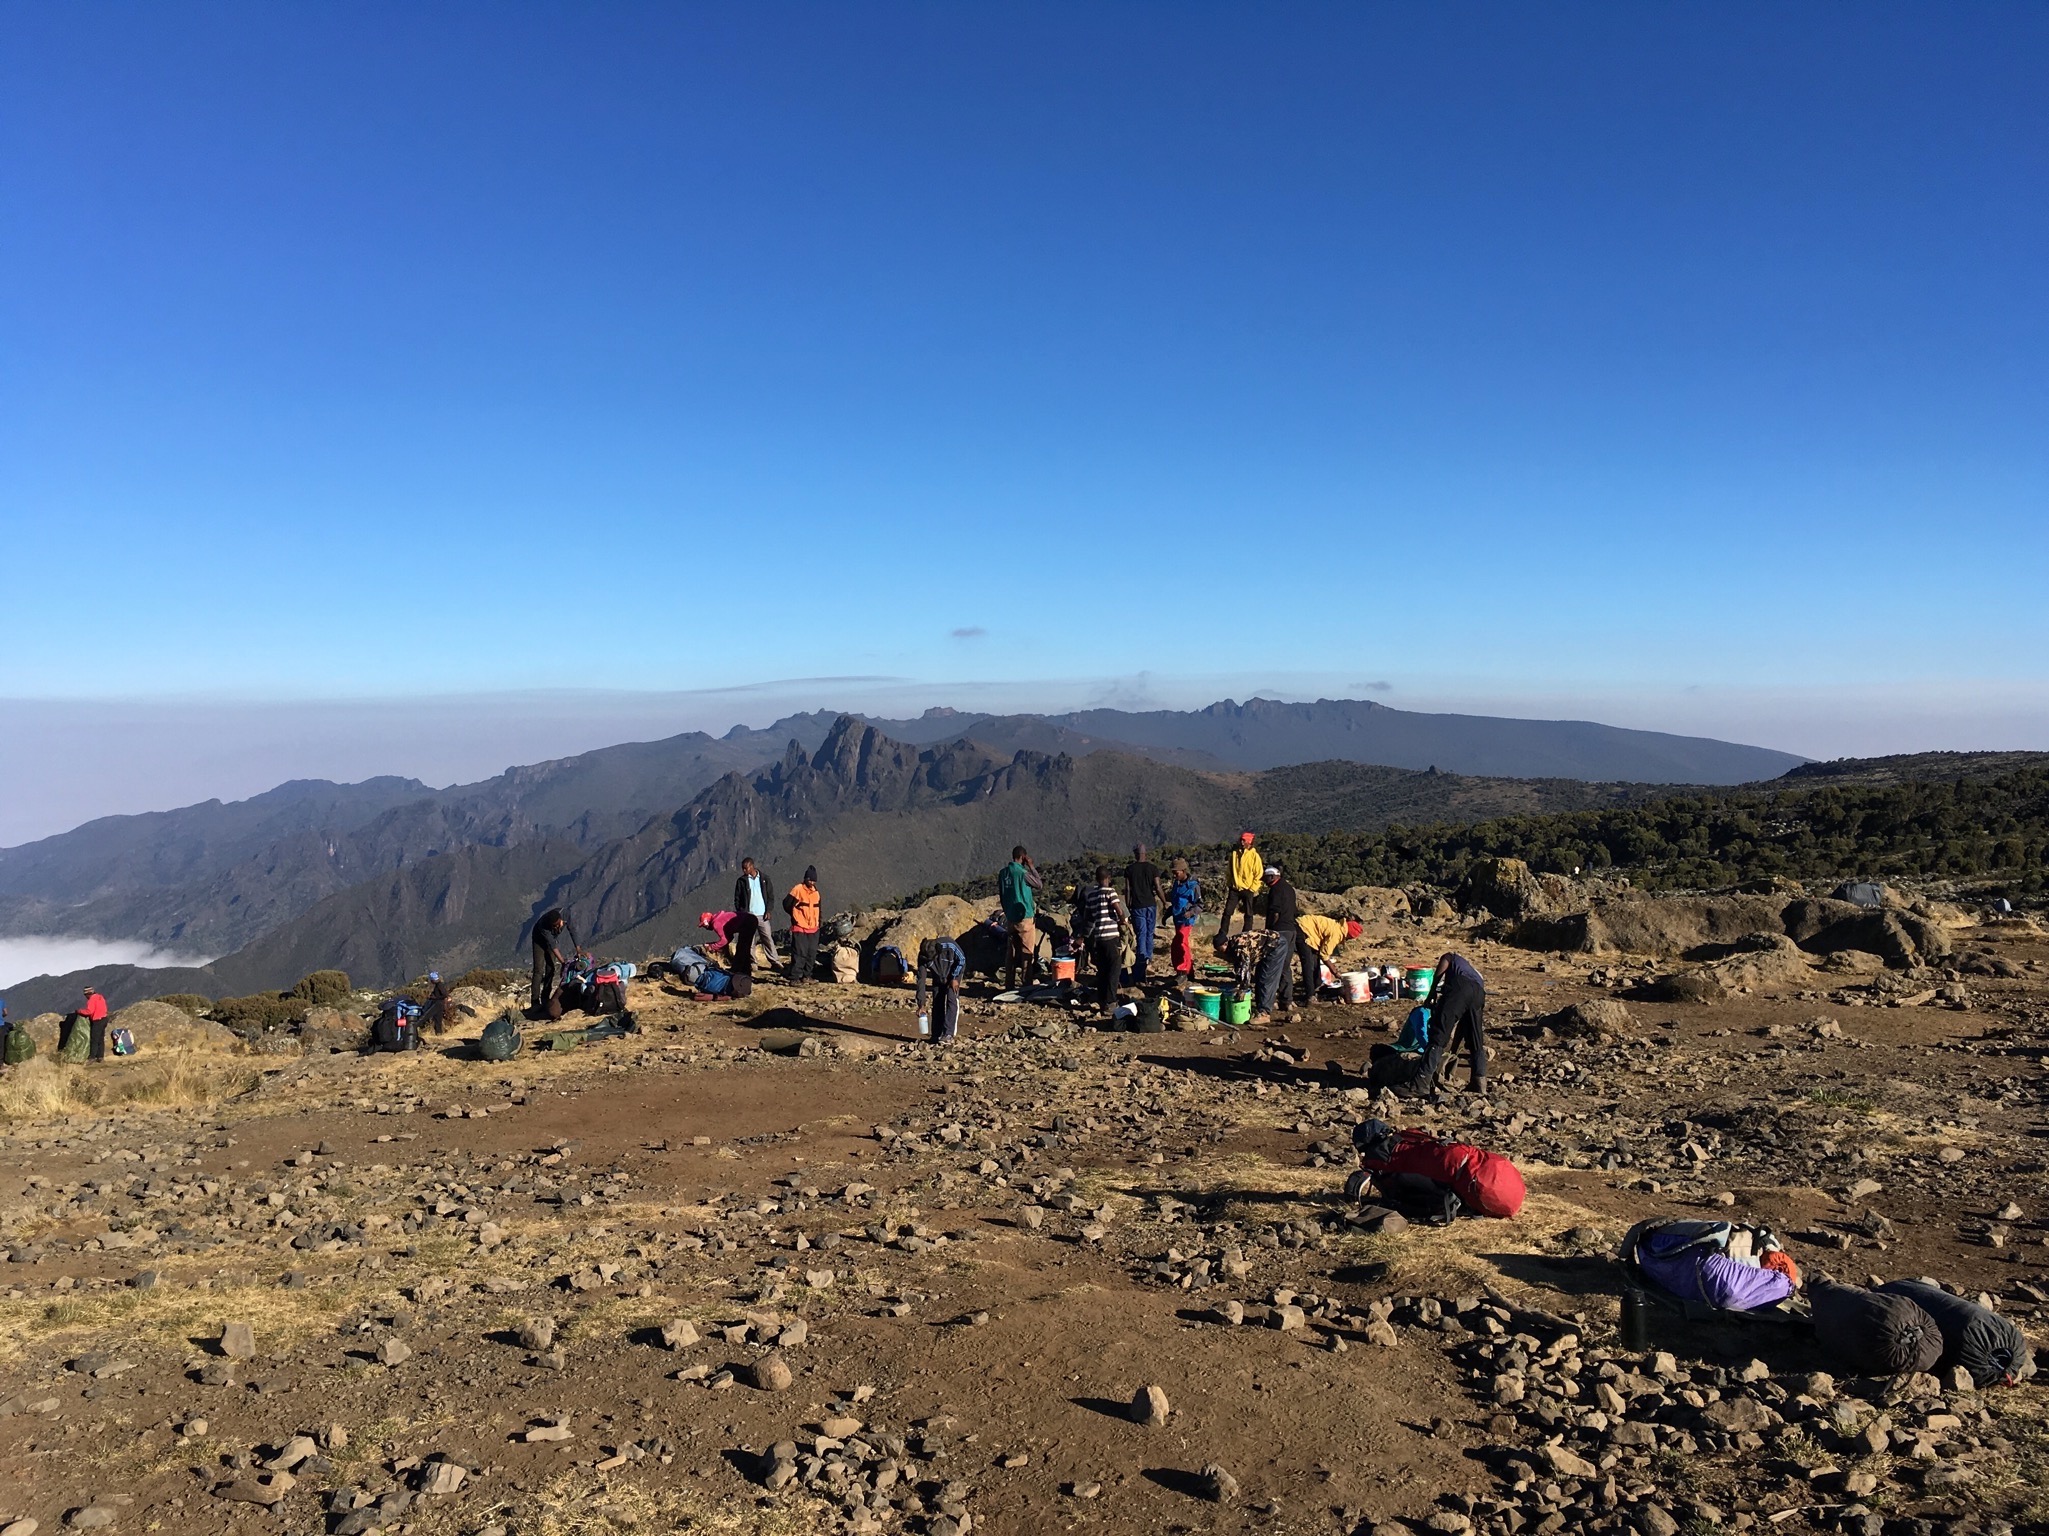 A group of porters gather on Mount Kilimanjaro, above the clouds